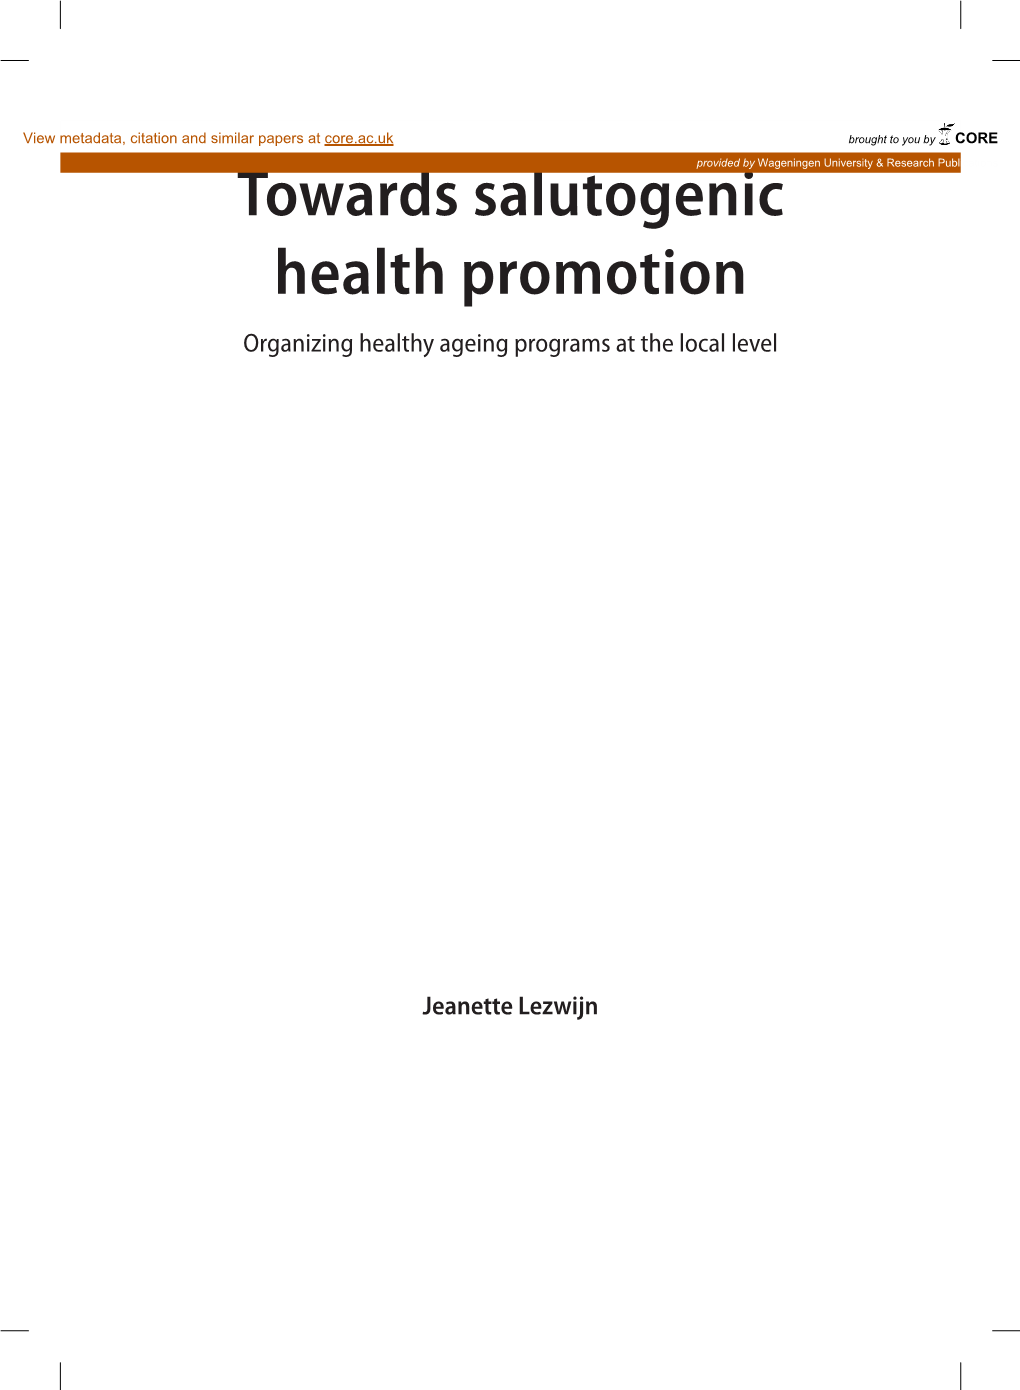 Towards Salutogenic Health Promotion Organizing Healthy Ageing Programs at the Local Level